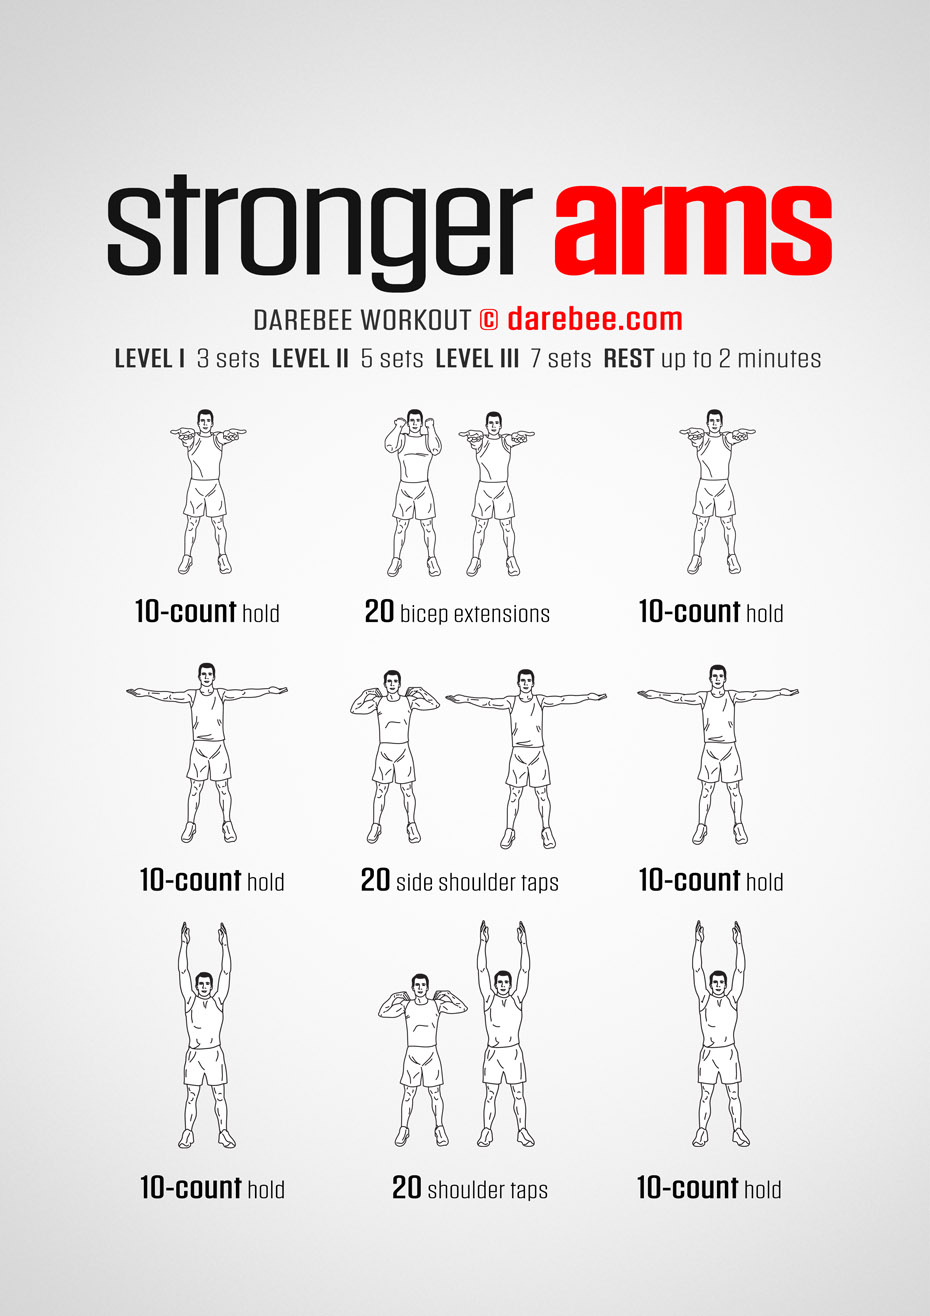 https://darebee.com/images/workouts/stronger-arms-workout.jpg